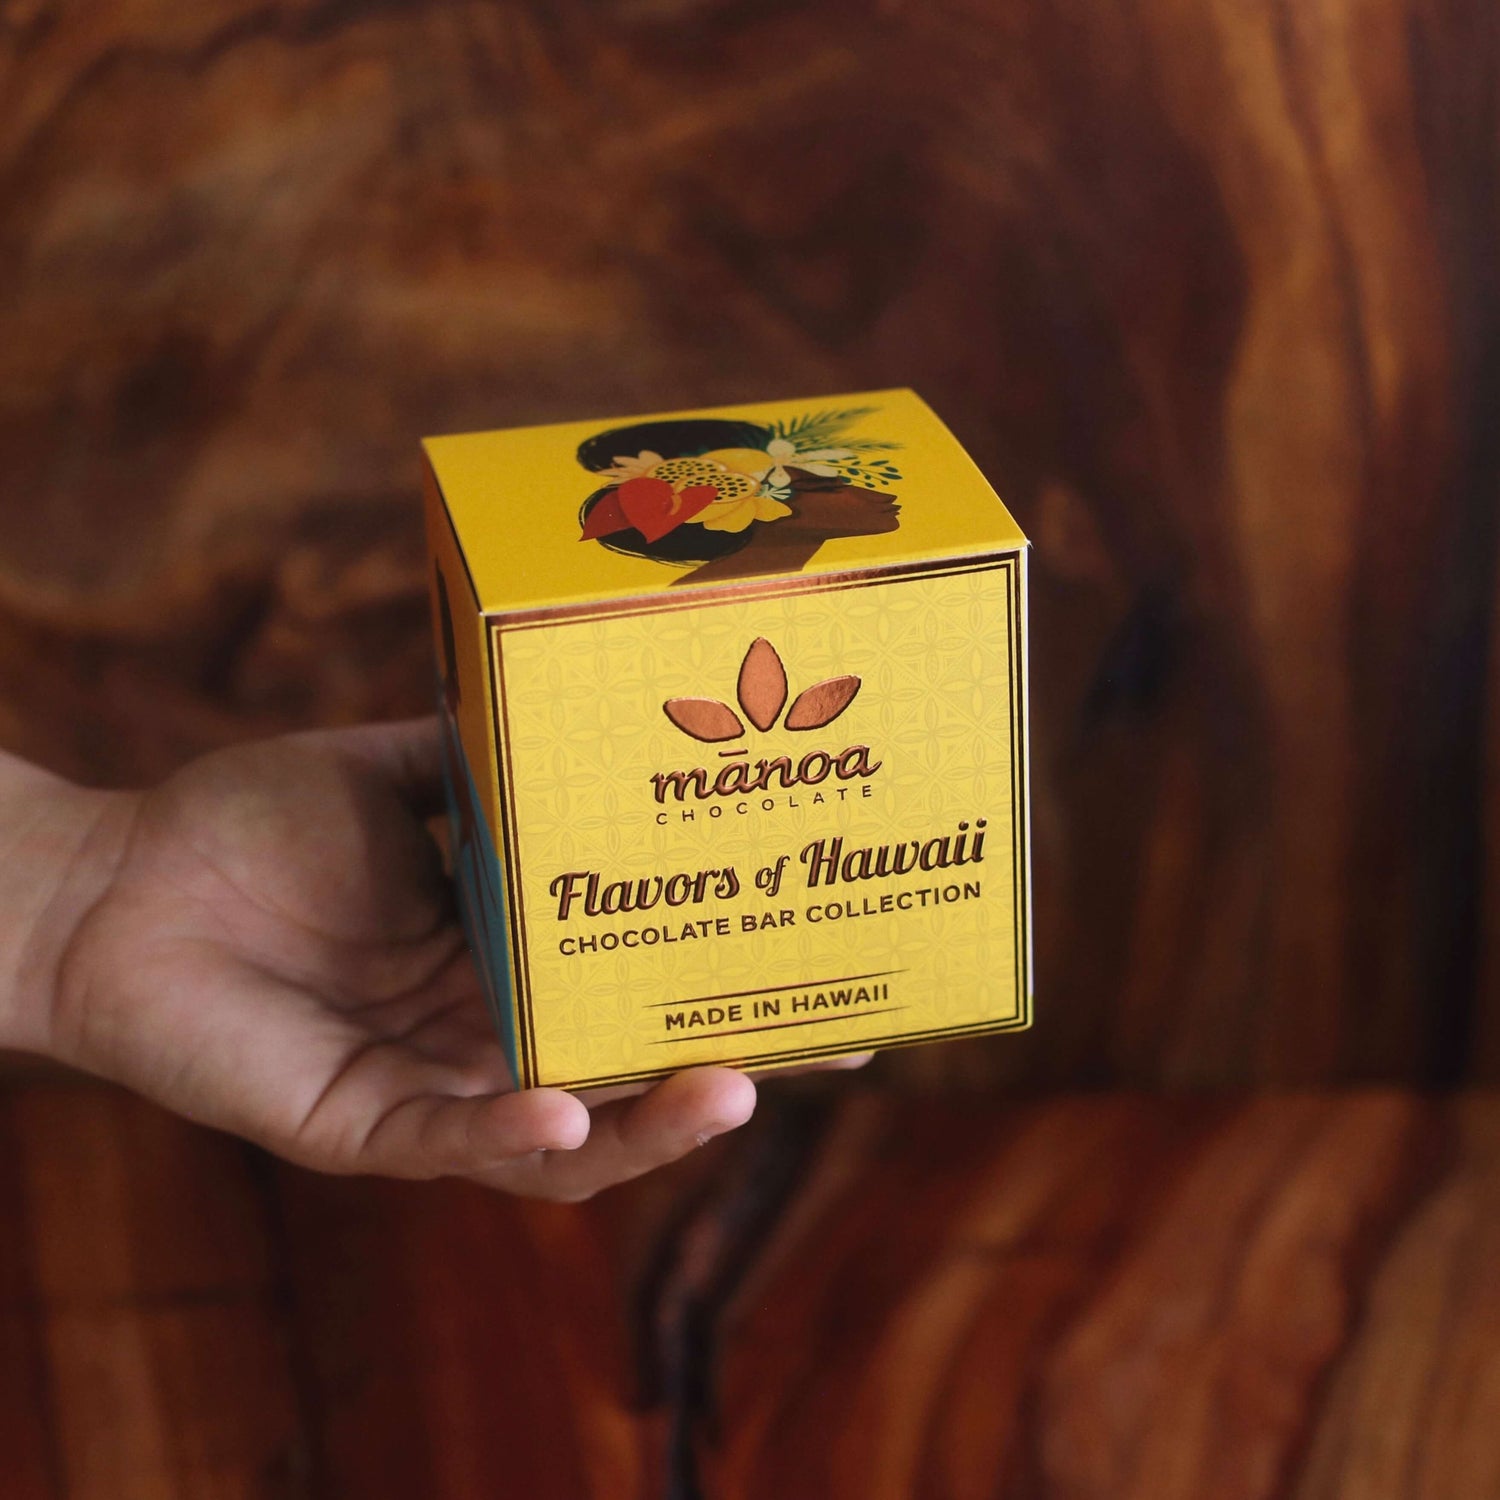 Image of yellow cube-shaped box with "Flavors of Hawaii Chocolate Bar Collection" on the front